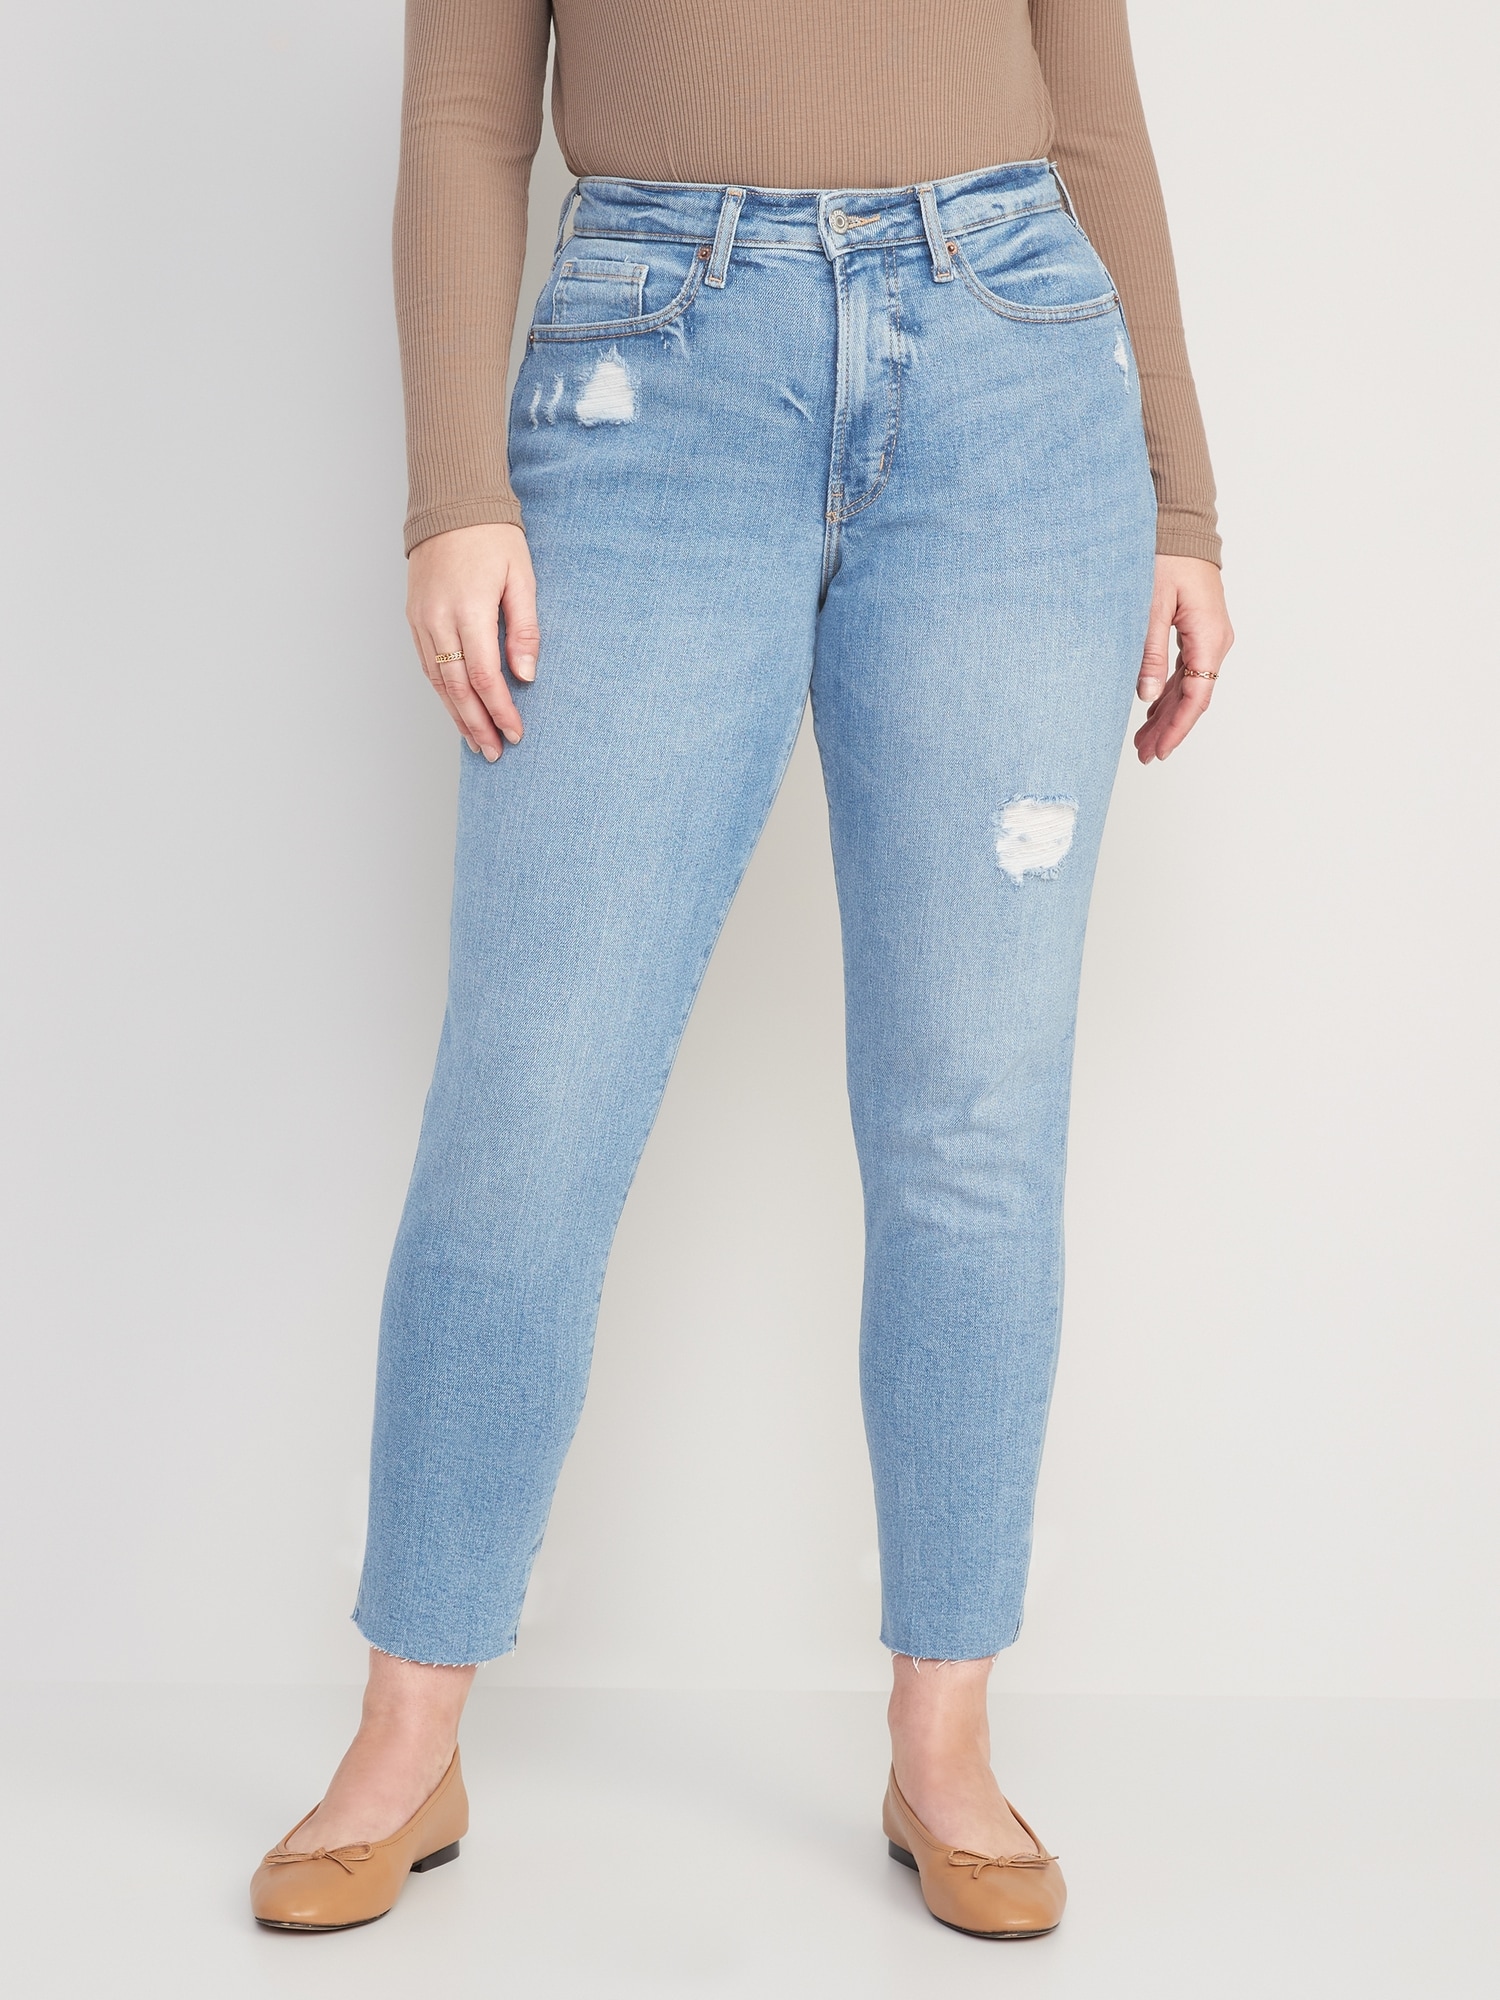 Curvy High-Waisted OG Straight Distressed Jeans for Women